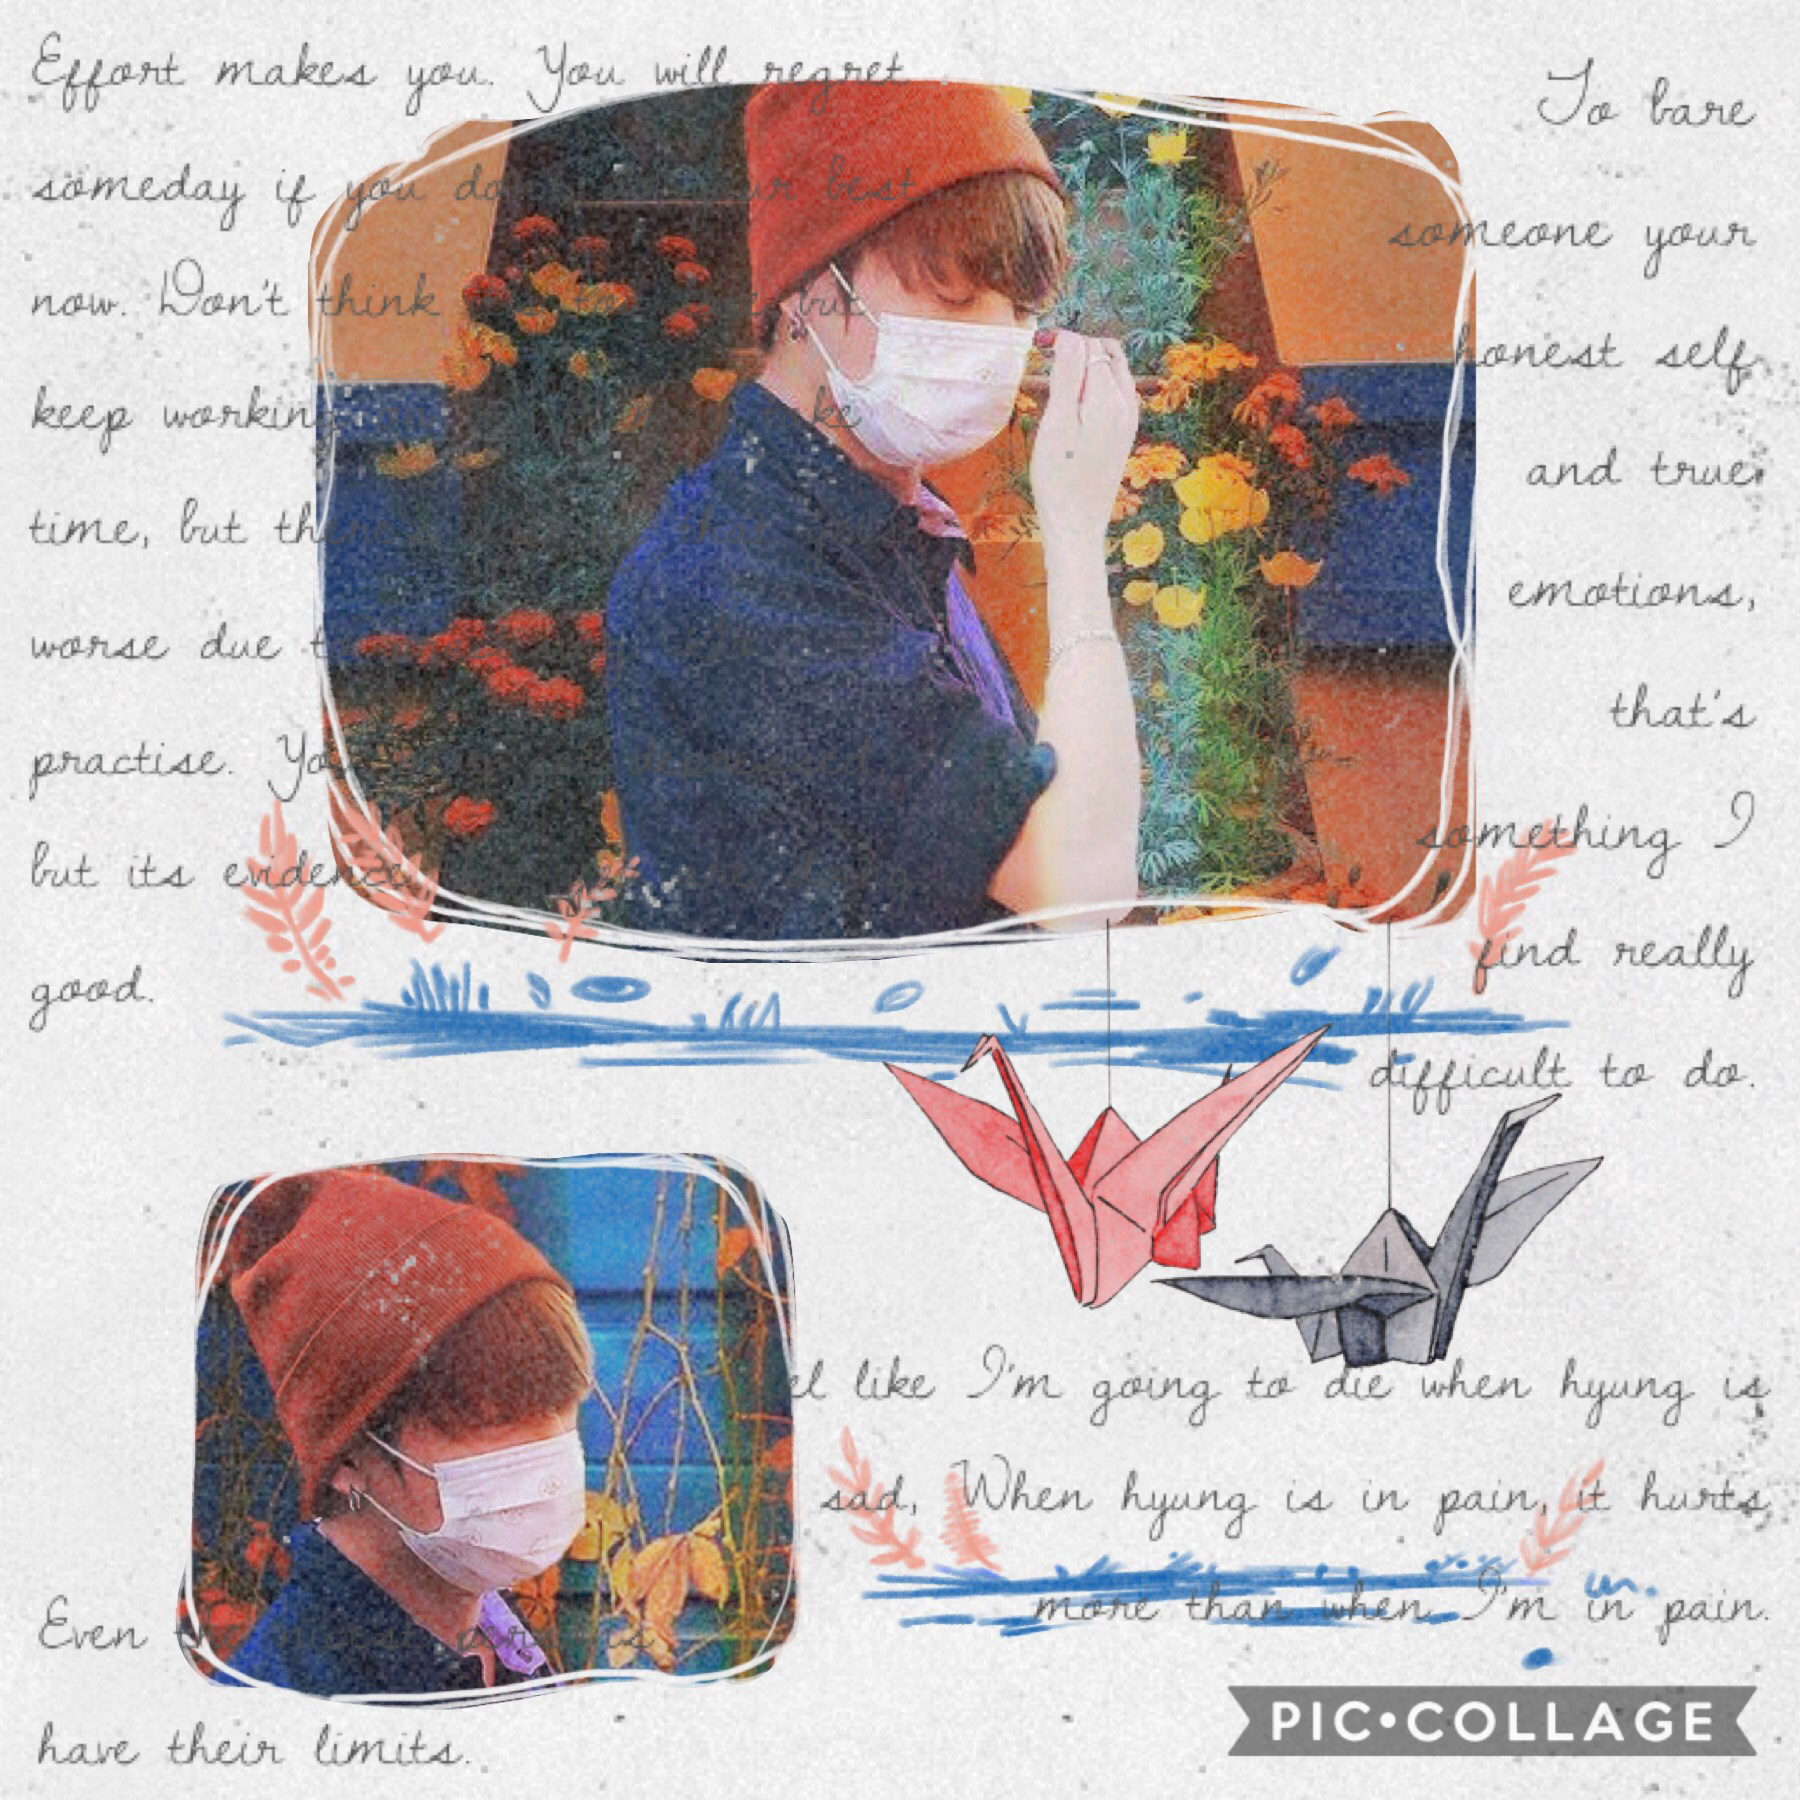 I decided to make something so that you can look at something new on my page so hope you like orange and blue kookie